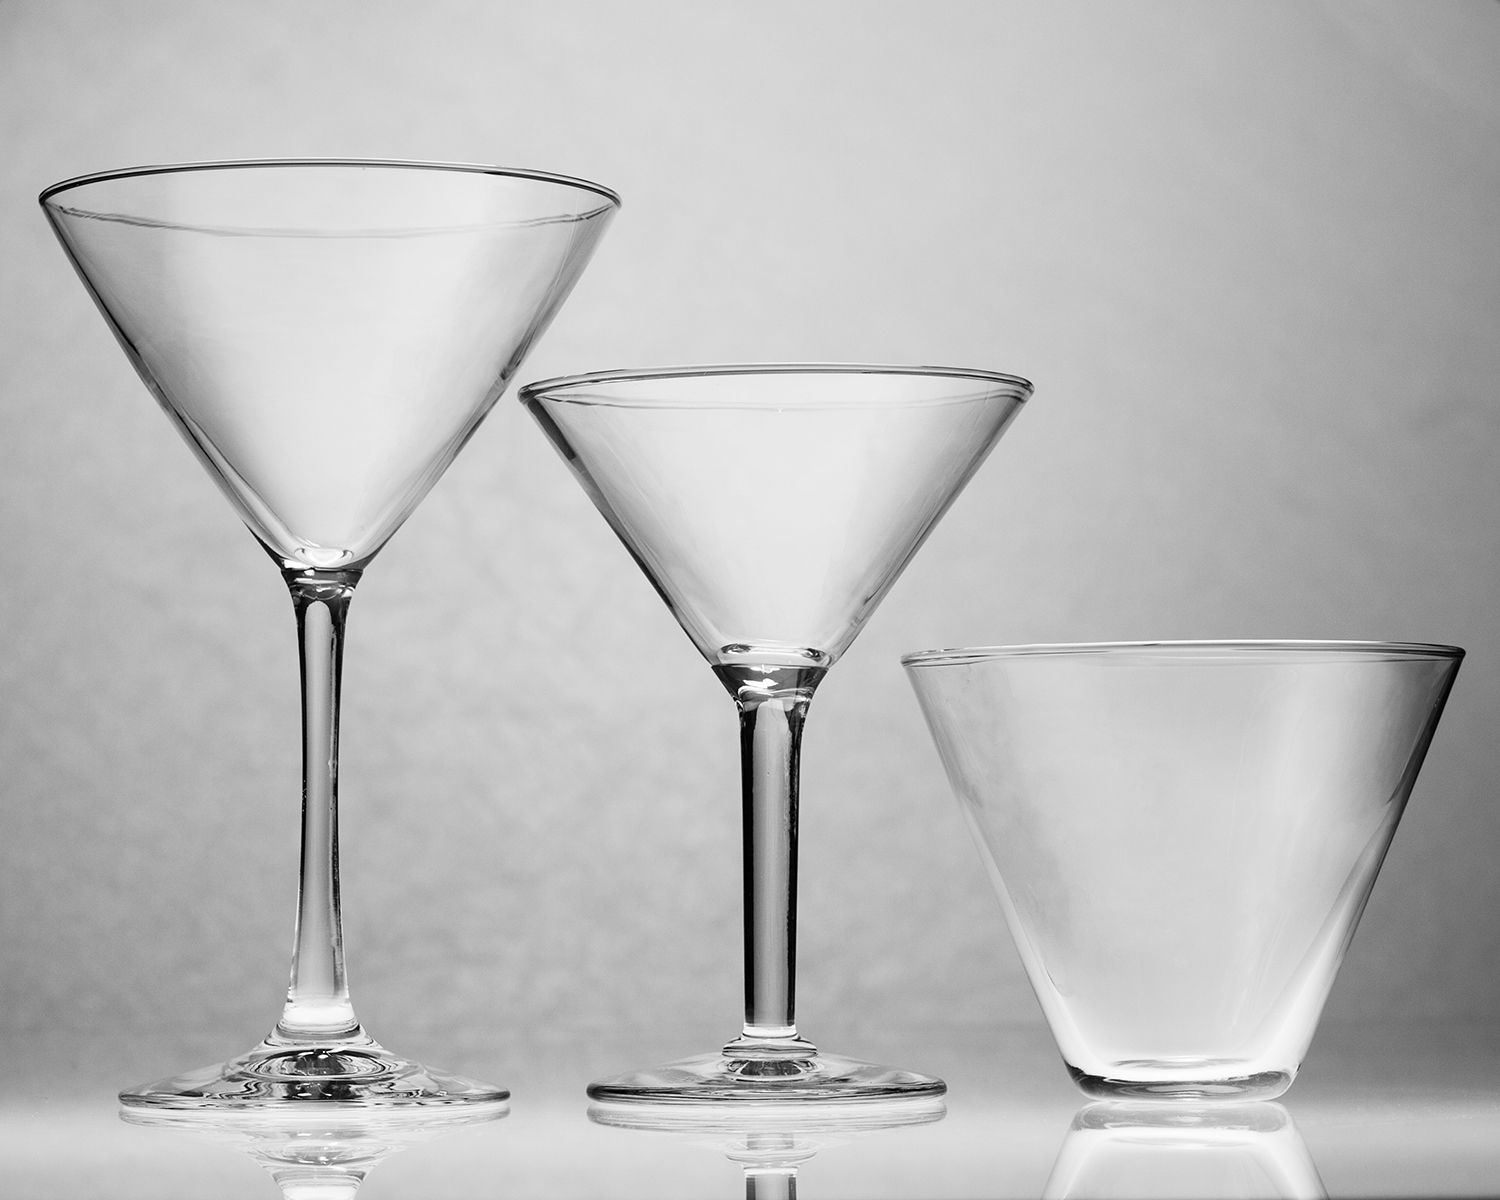 The Types of Glassware Every Bar Needs